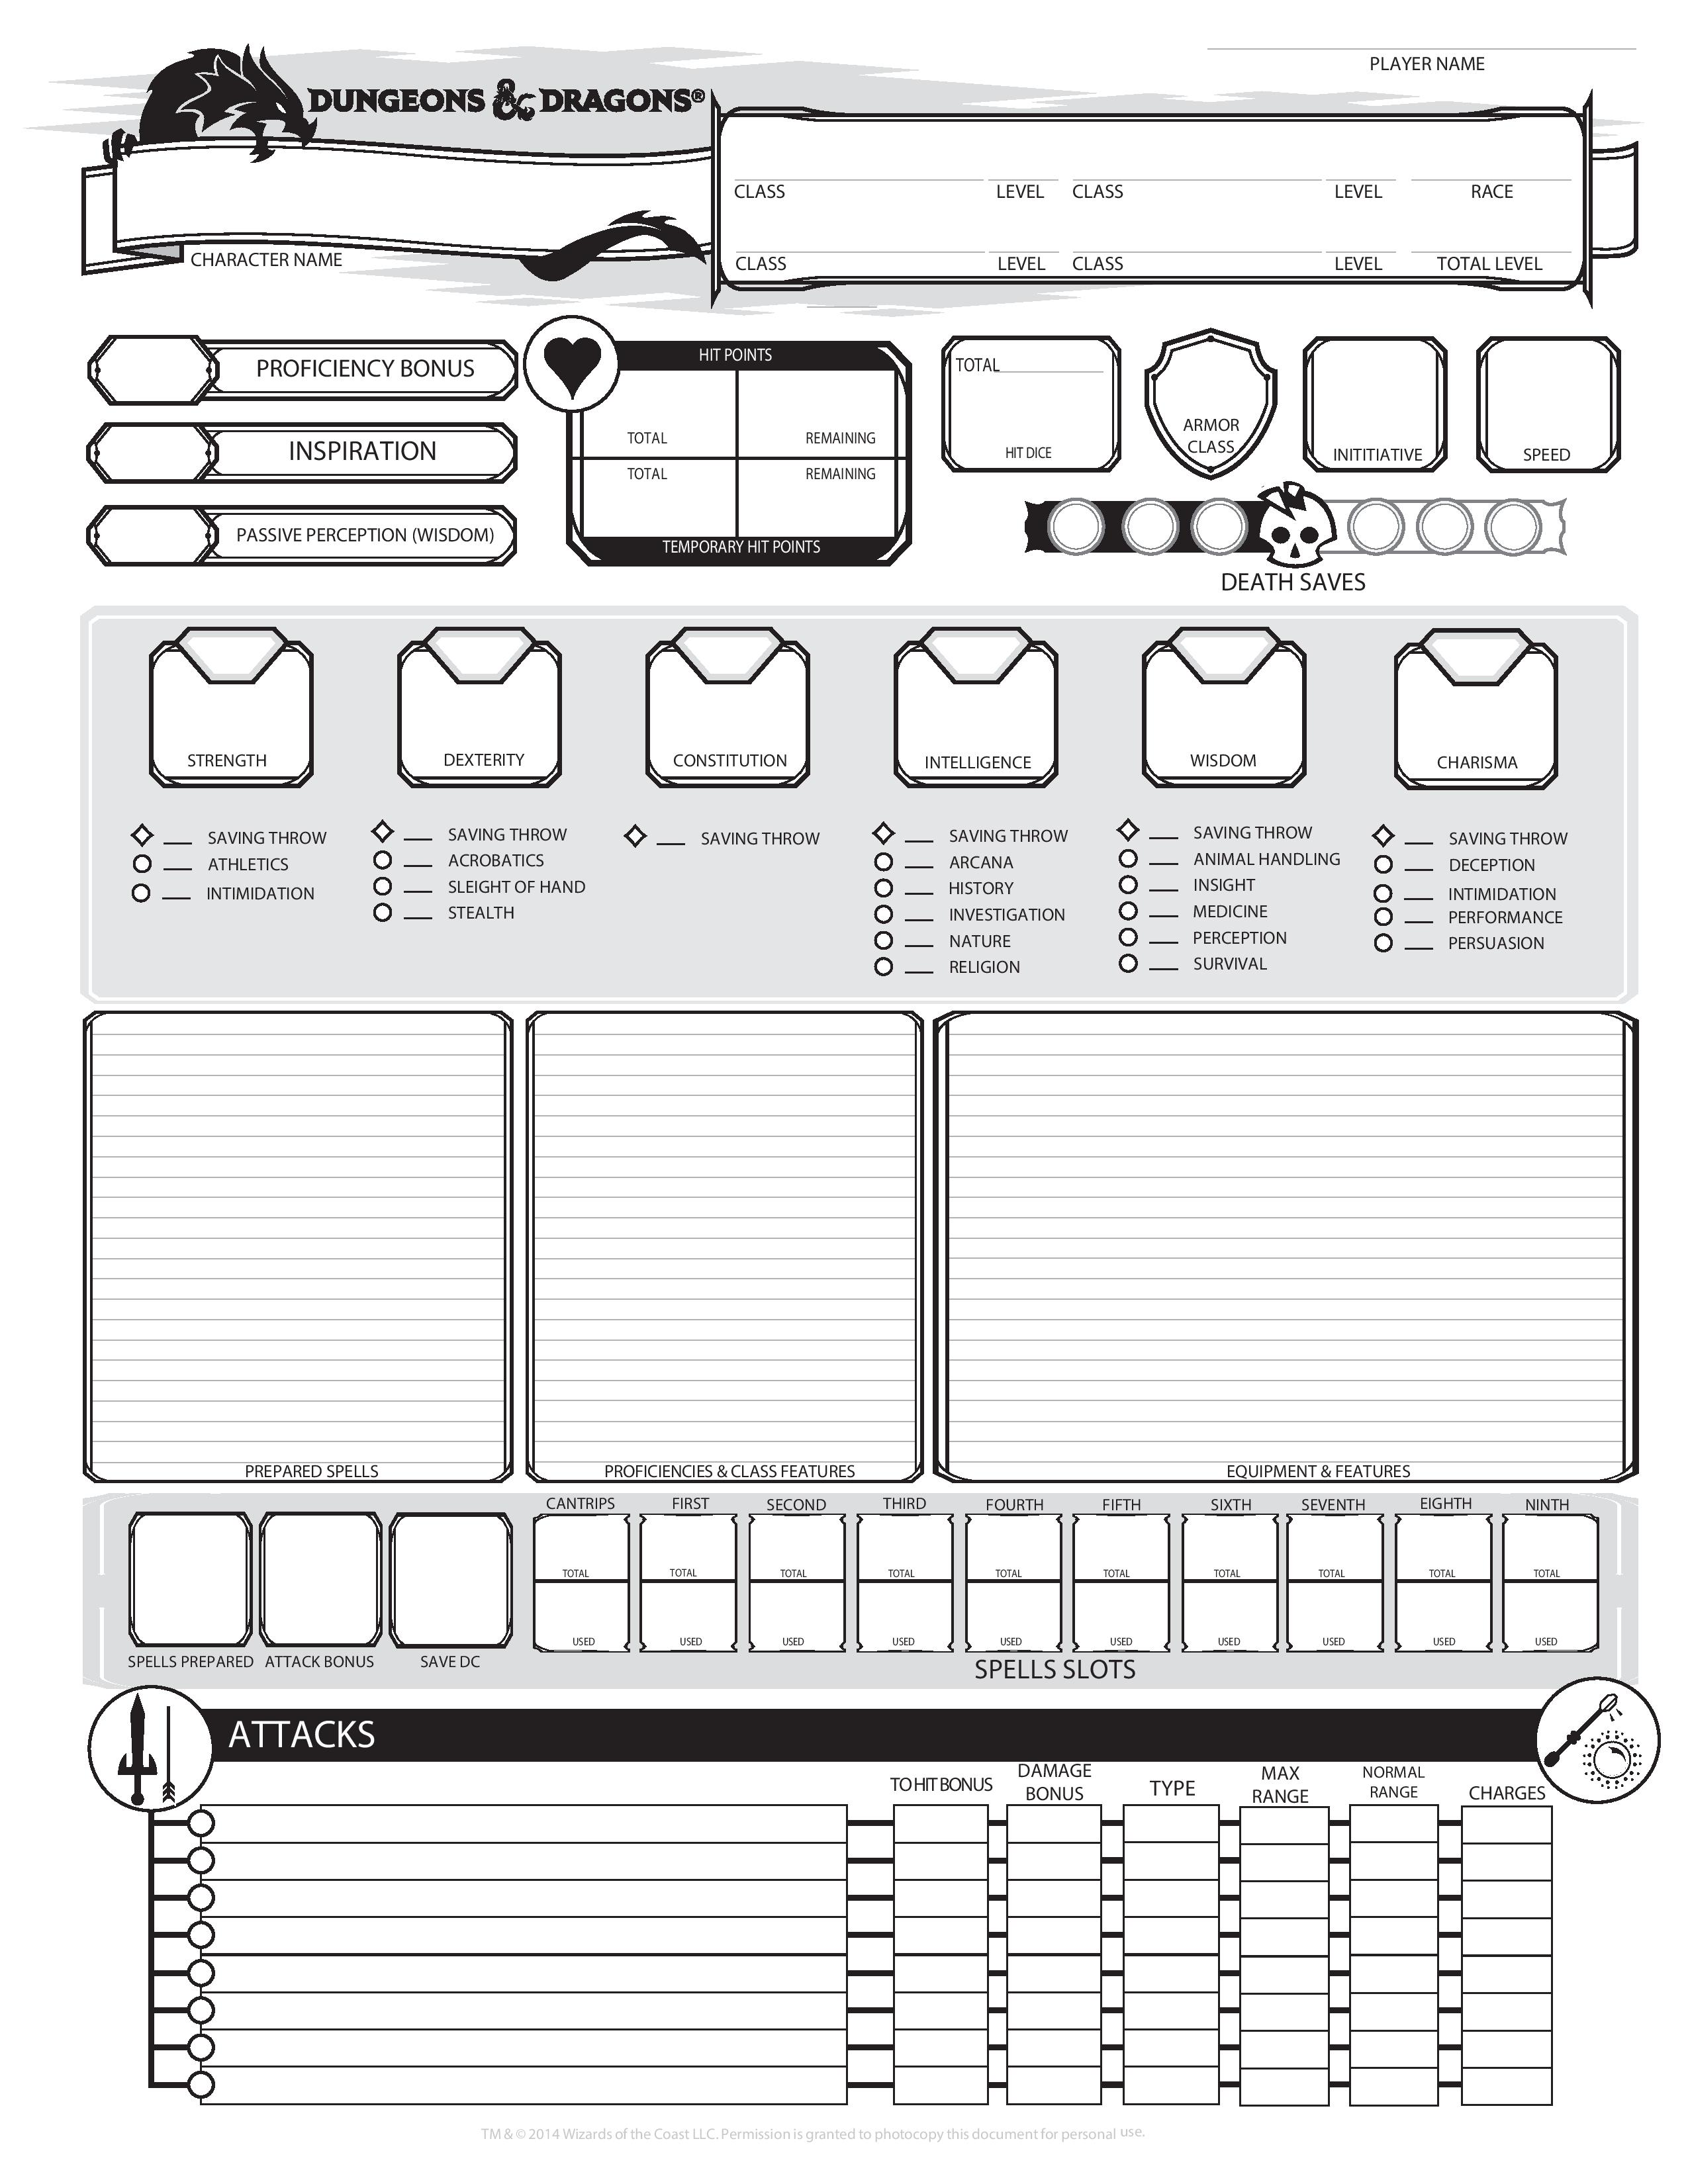 Character Sheet by /u/corrupted55